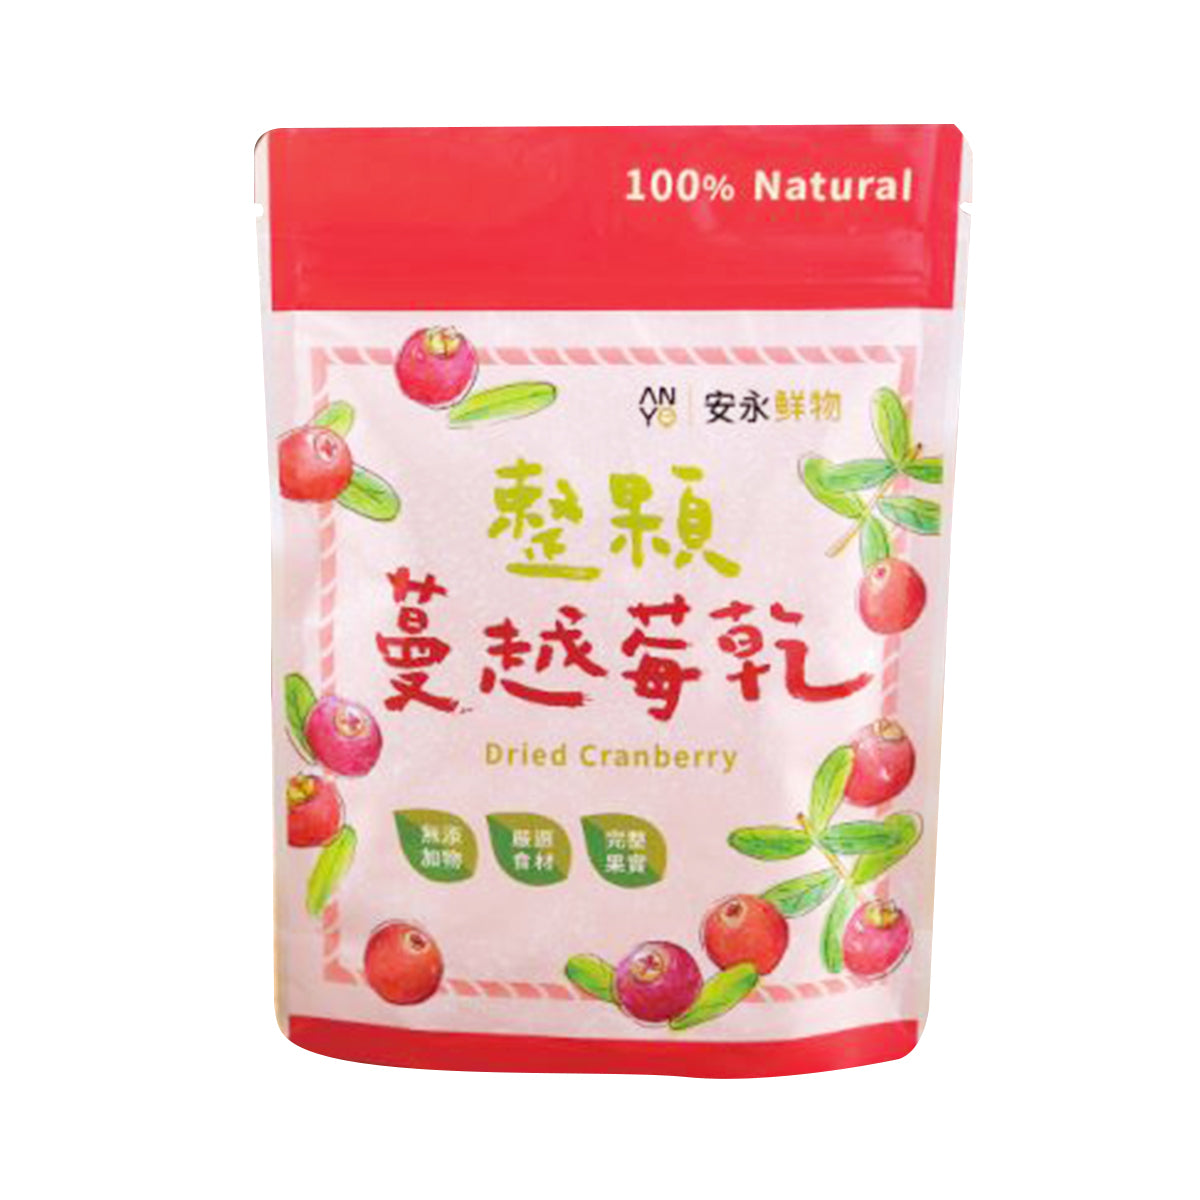 【ANYO】Dried Cranberry 150g